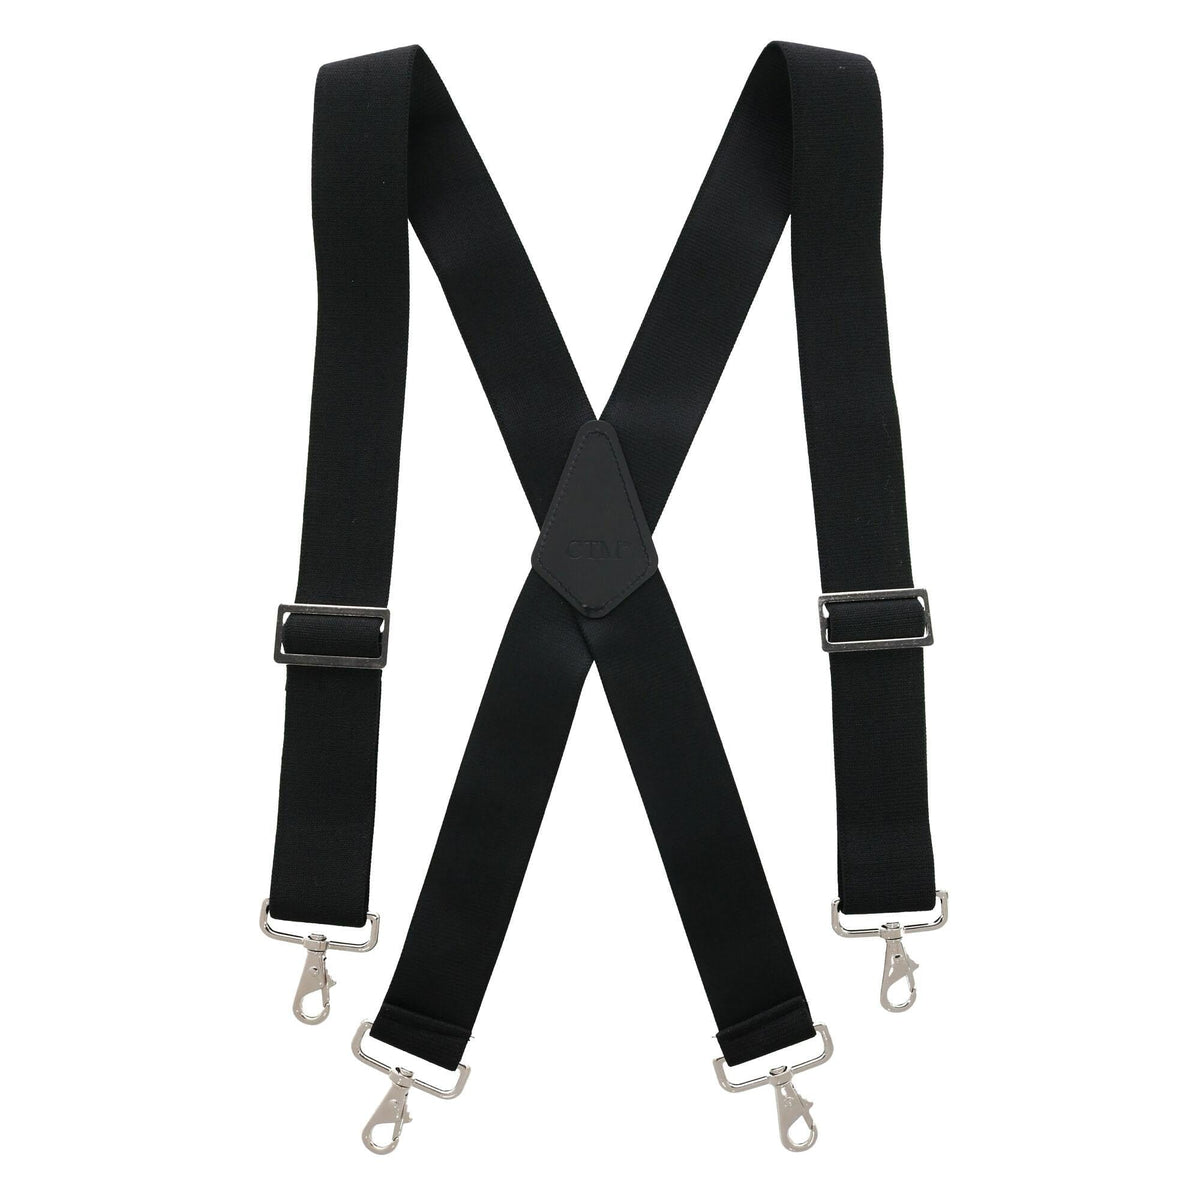 Men's Industrial Terry Logger Suspenders with Metal Swivel Hook Ends by ...